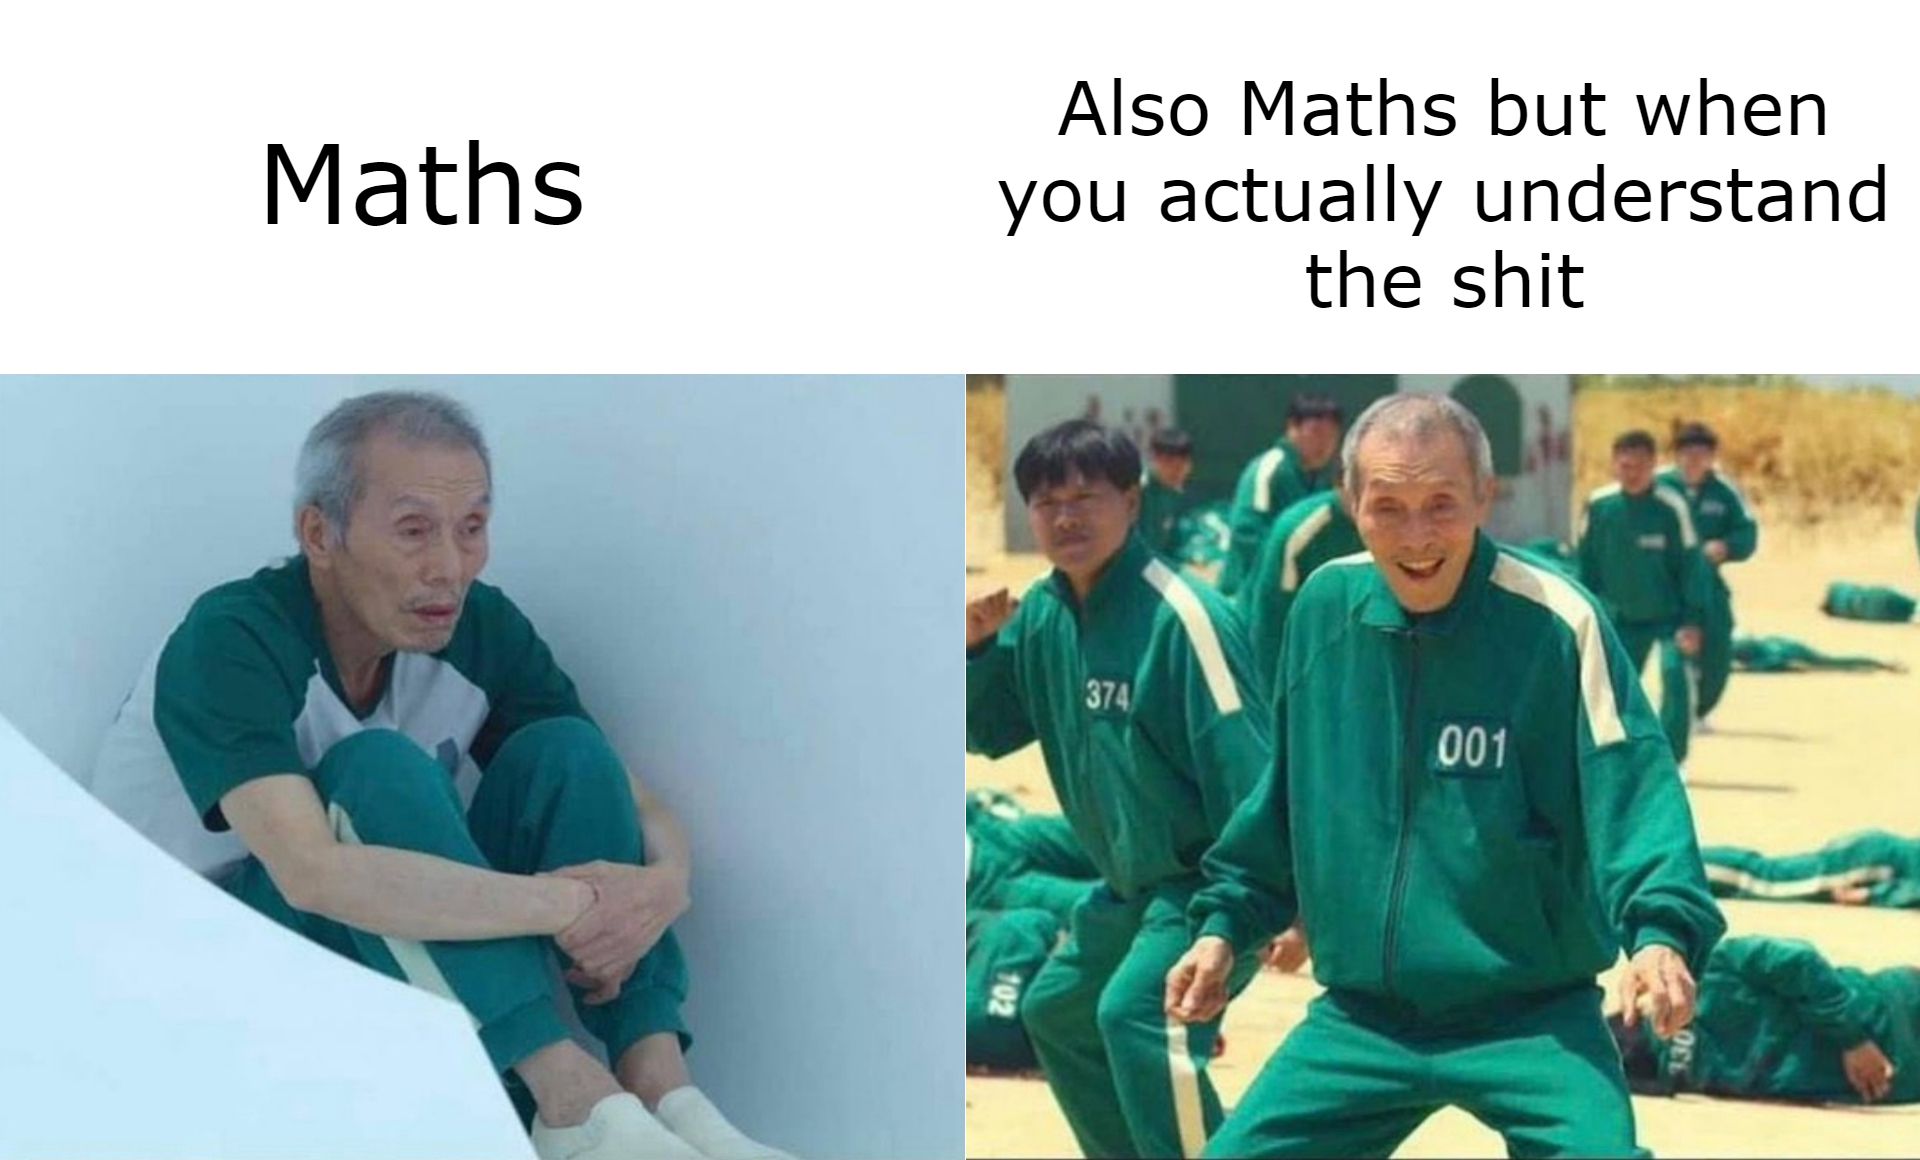 Calculus maketh the student